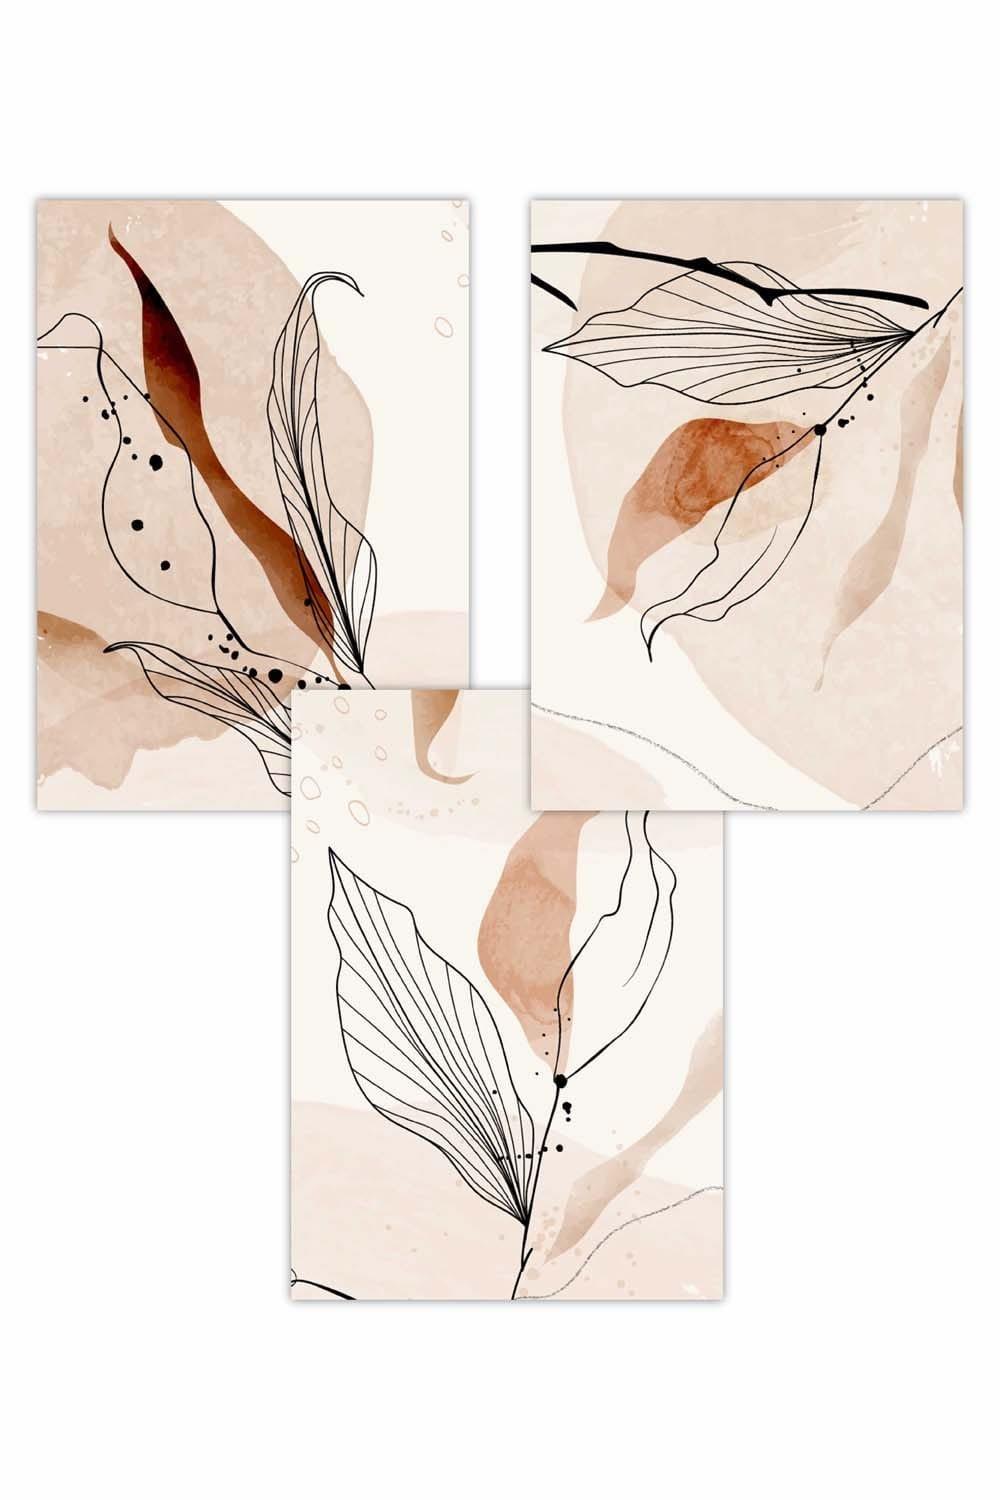 Set of 3 Graphical Line Art Autumn Leaves Art Posters